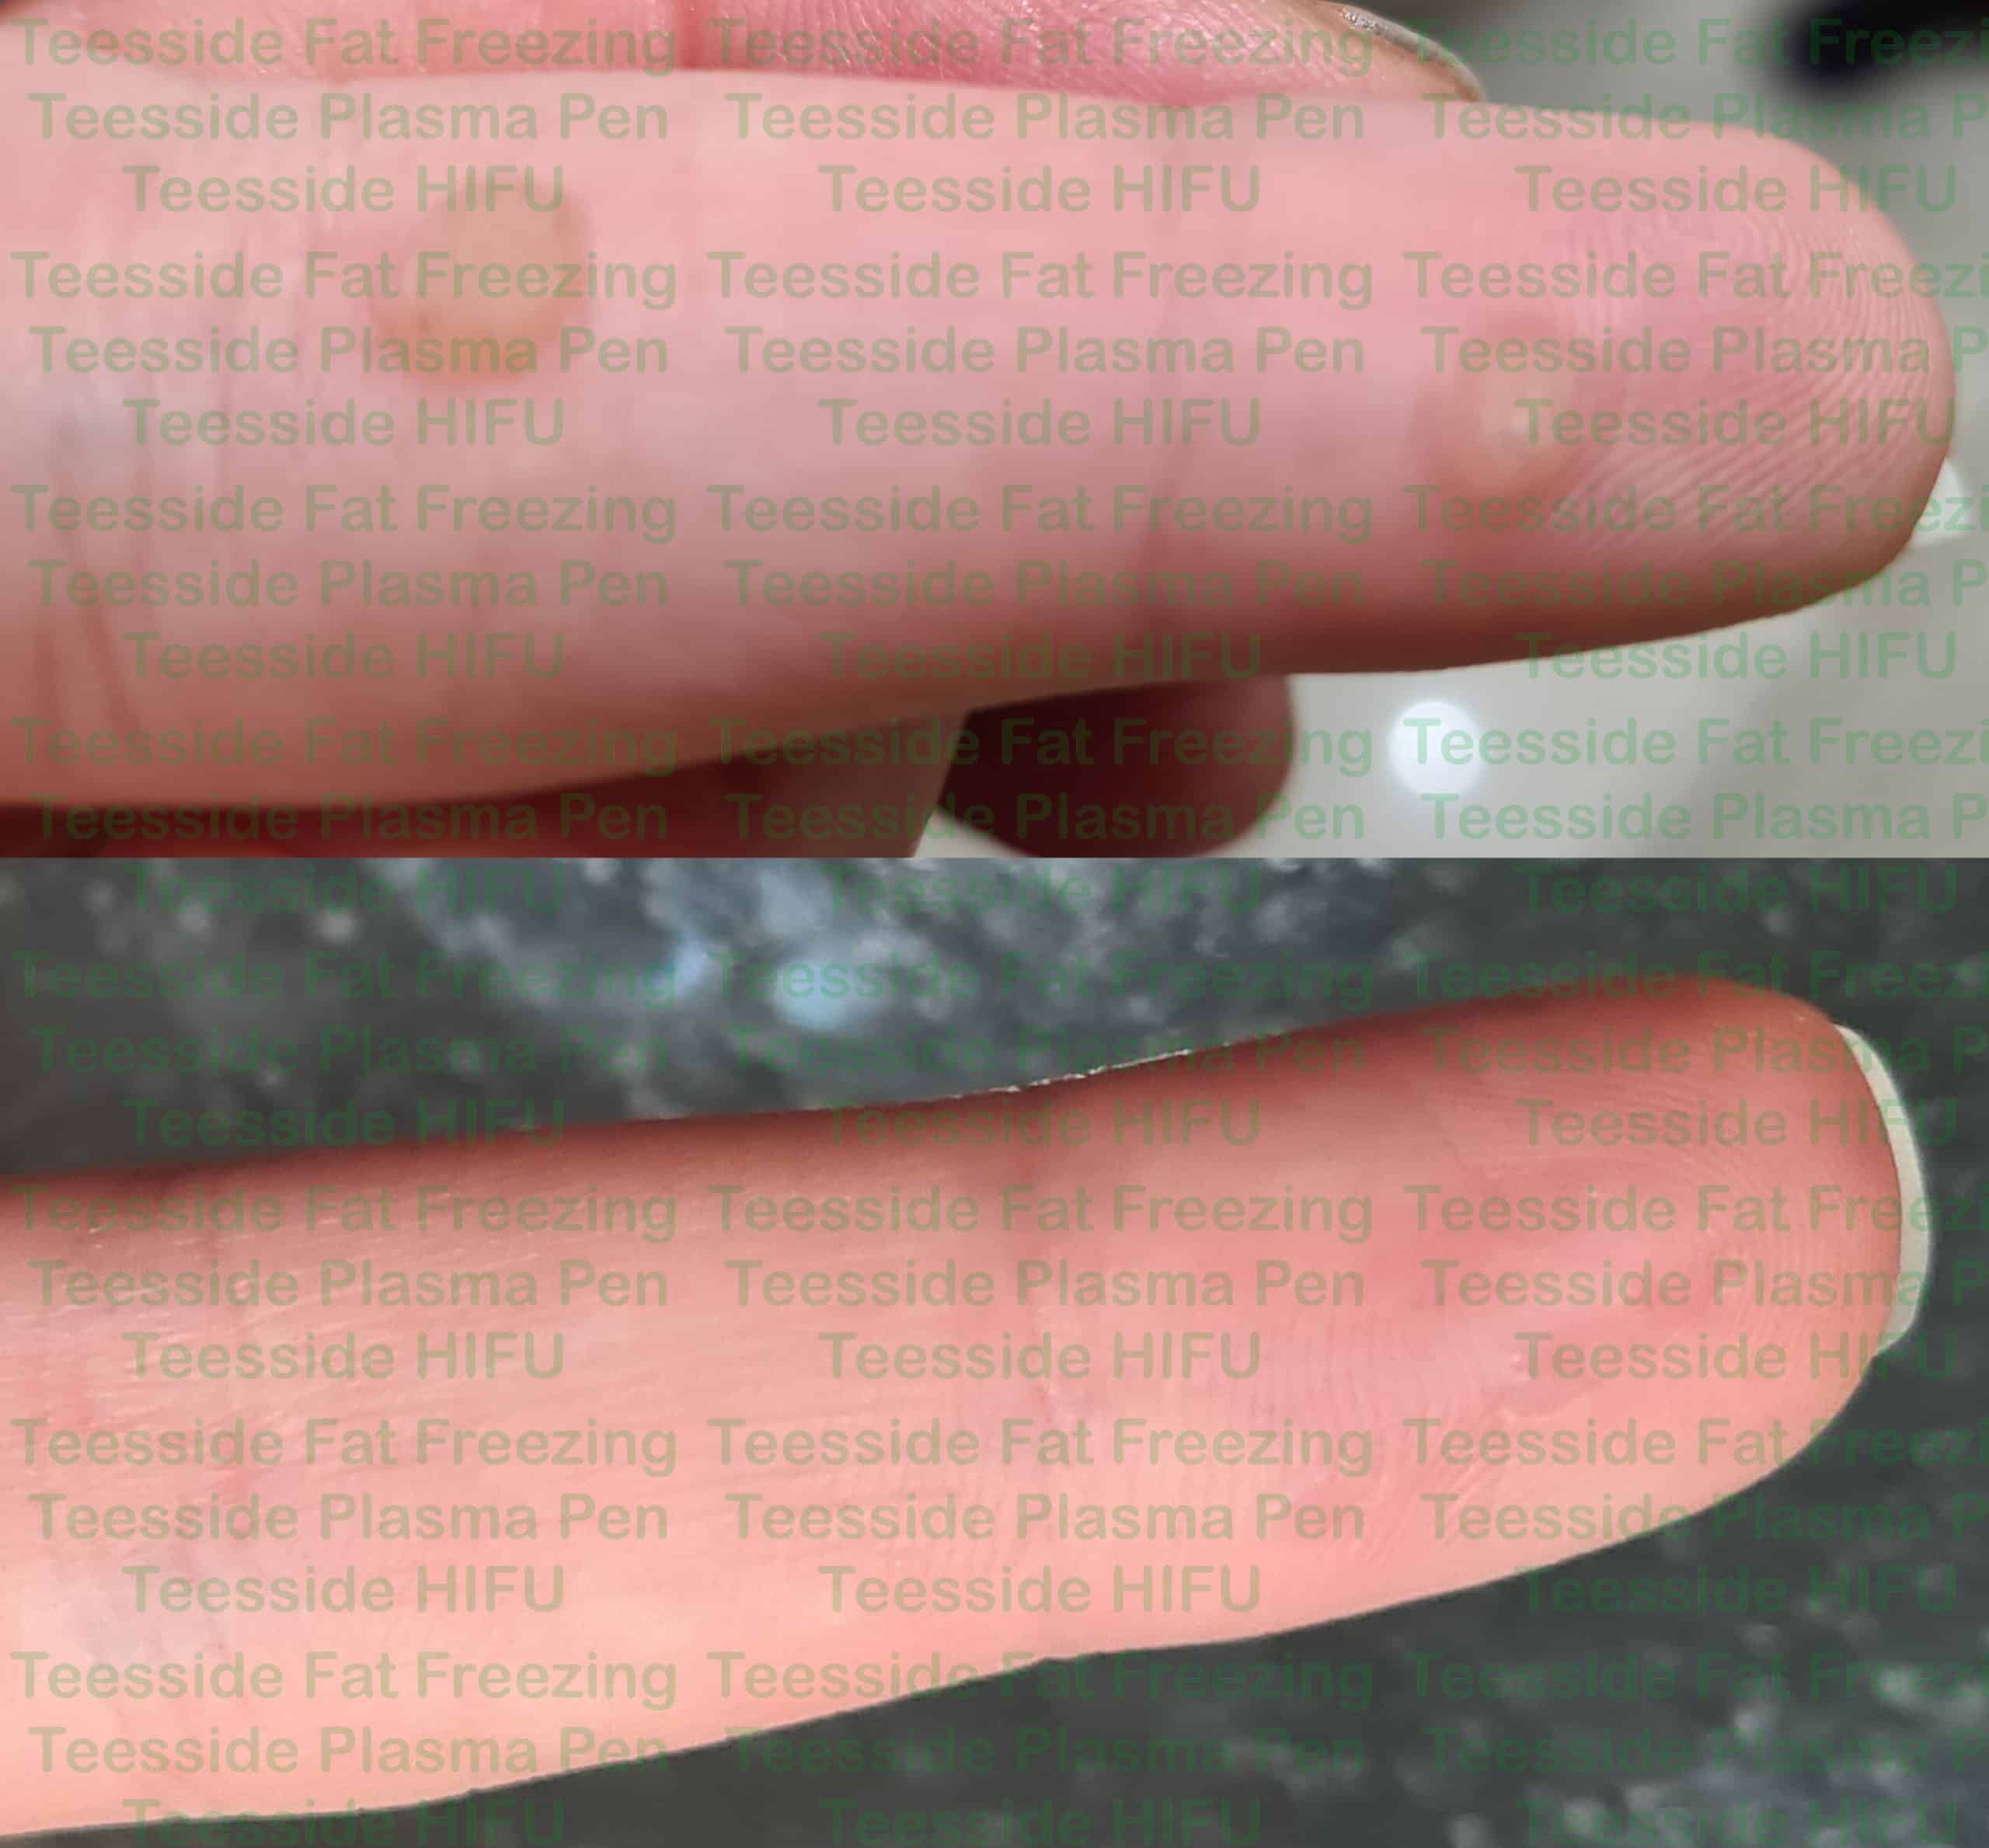 Warts on finger, before and after removal with plasma pen